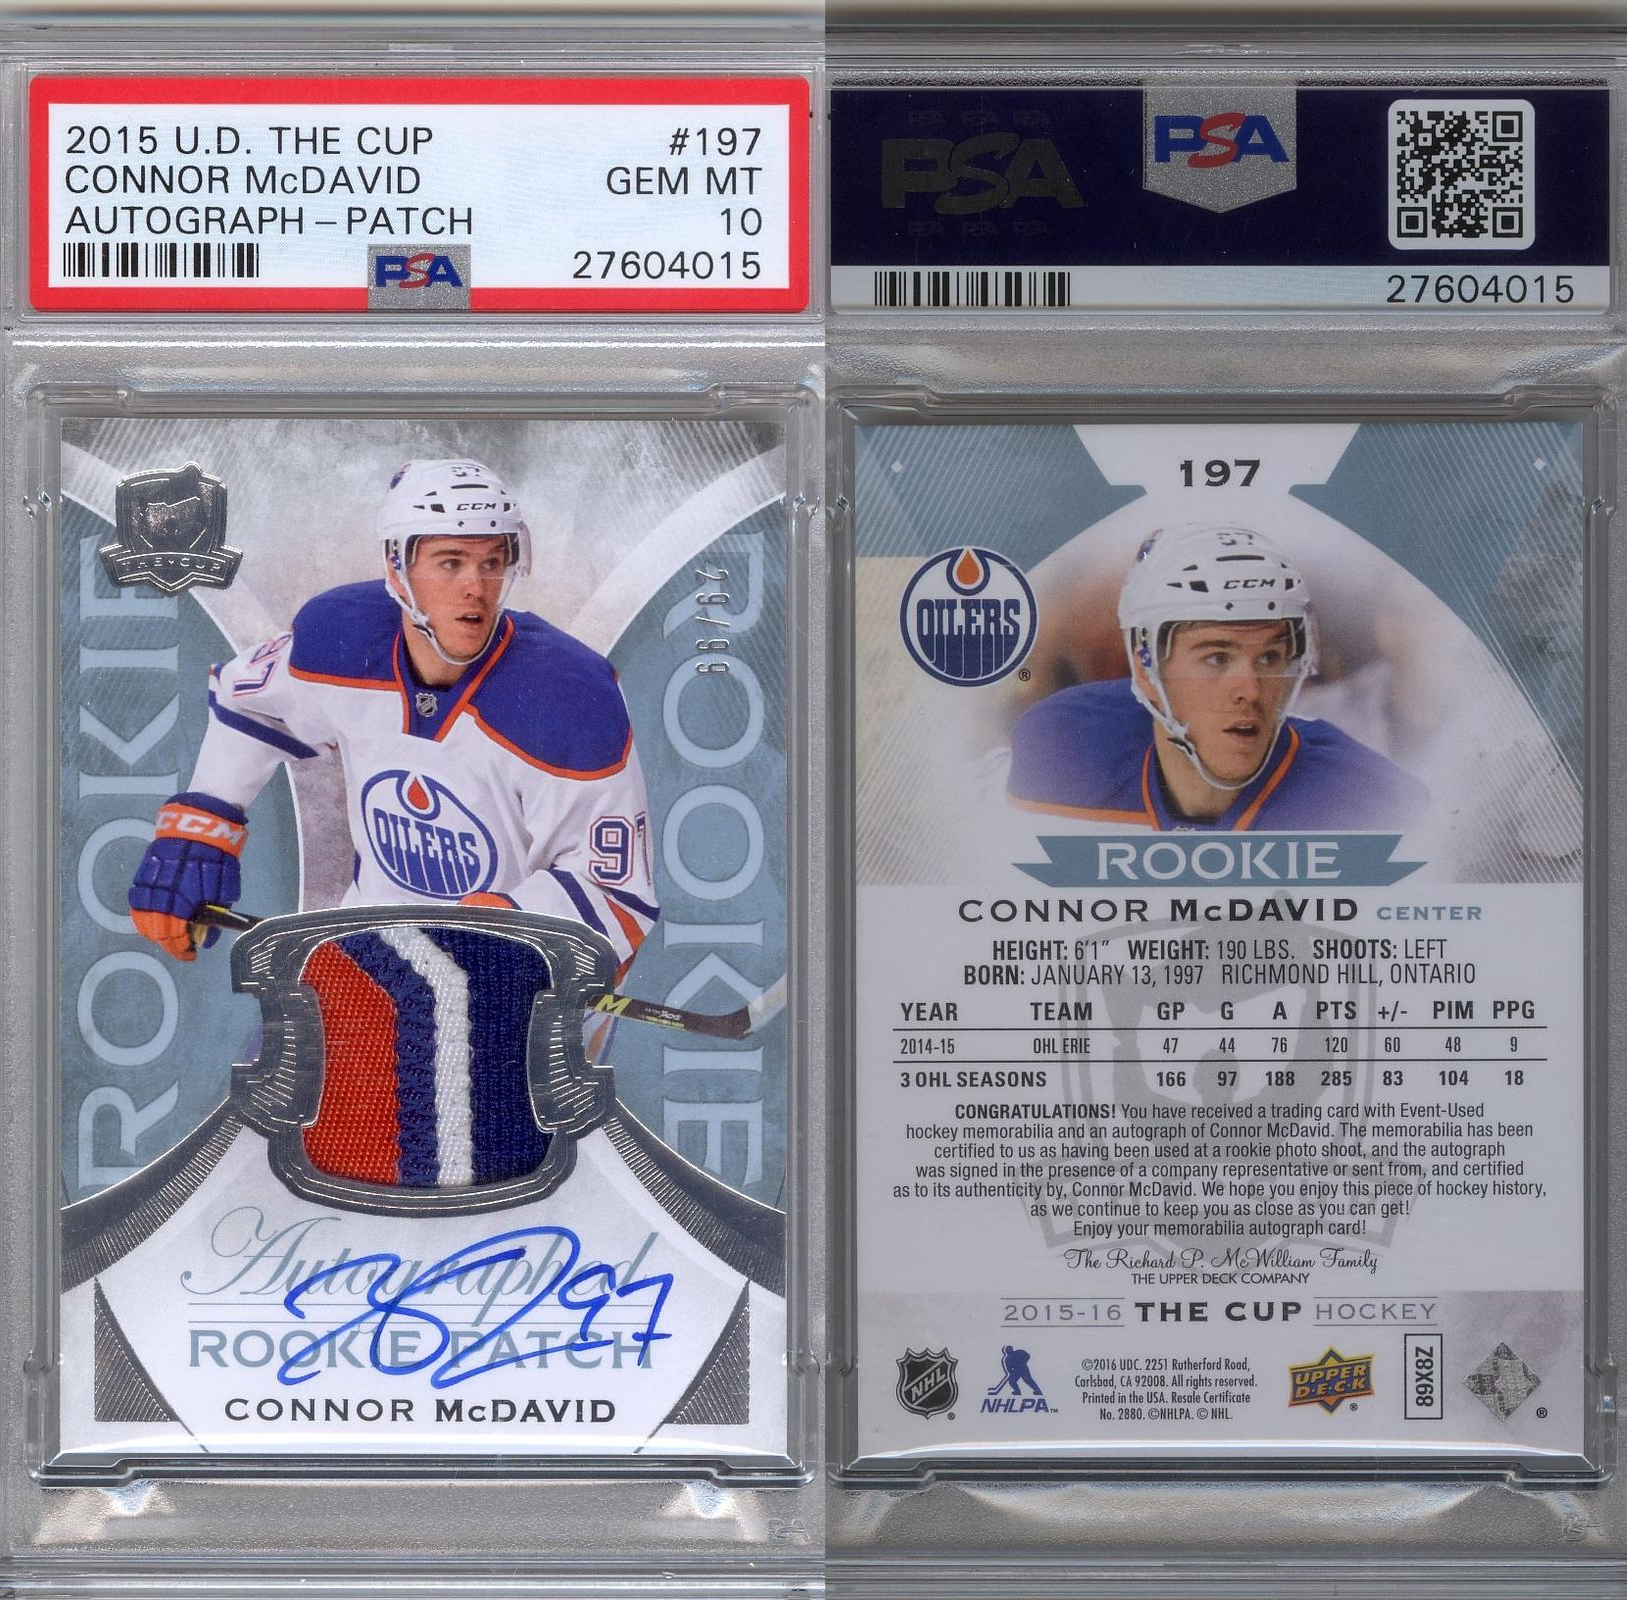 UPDATE: McDavid's most valuable rookie card is about to sell for